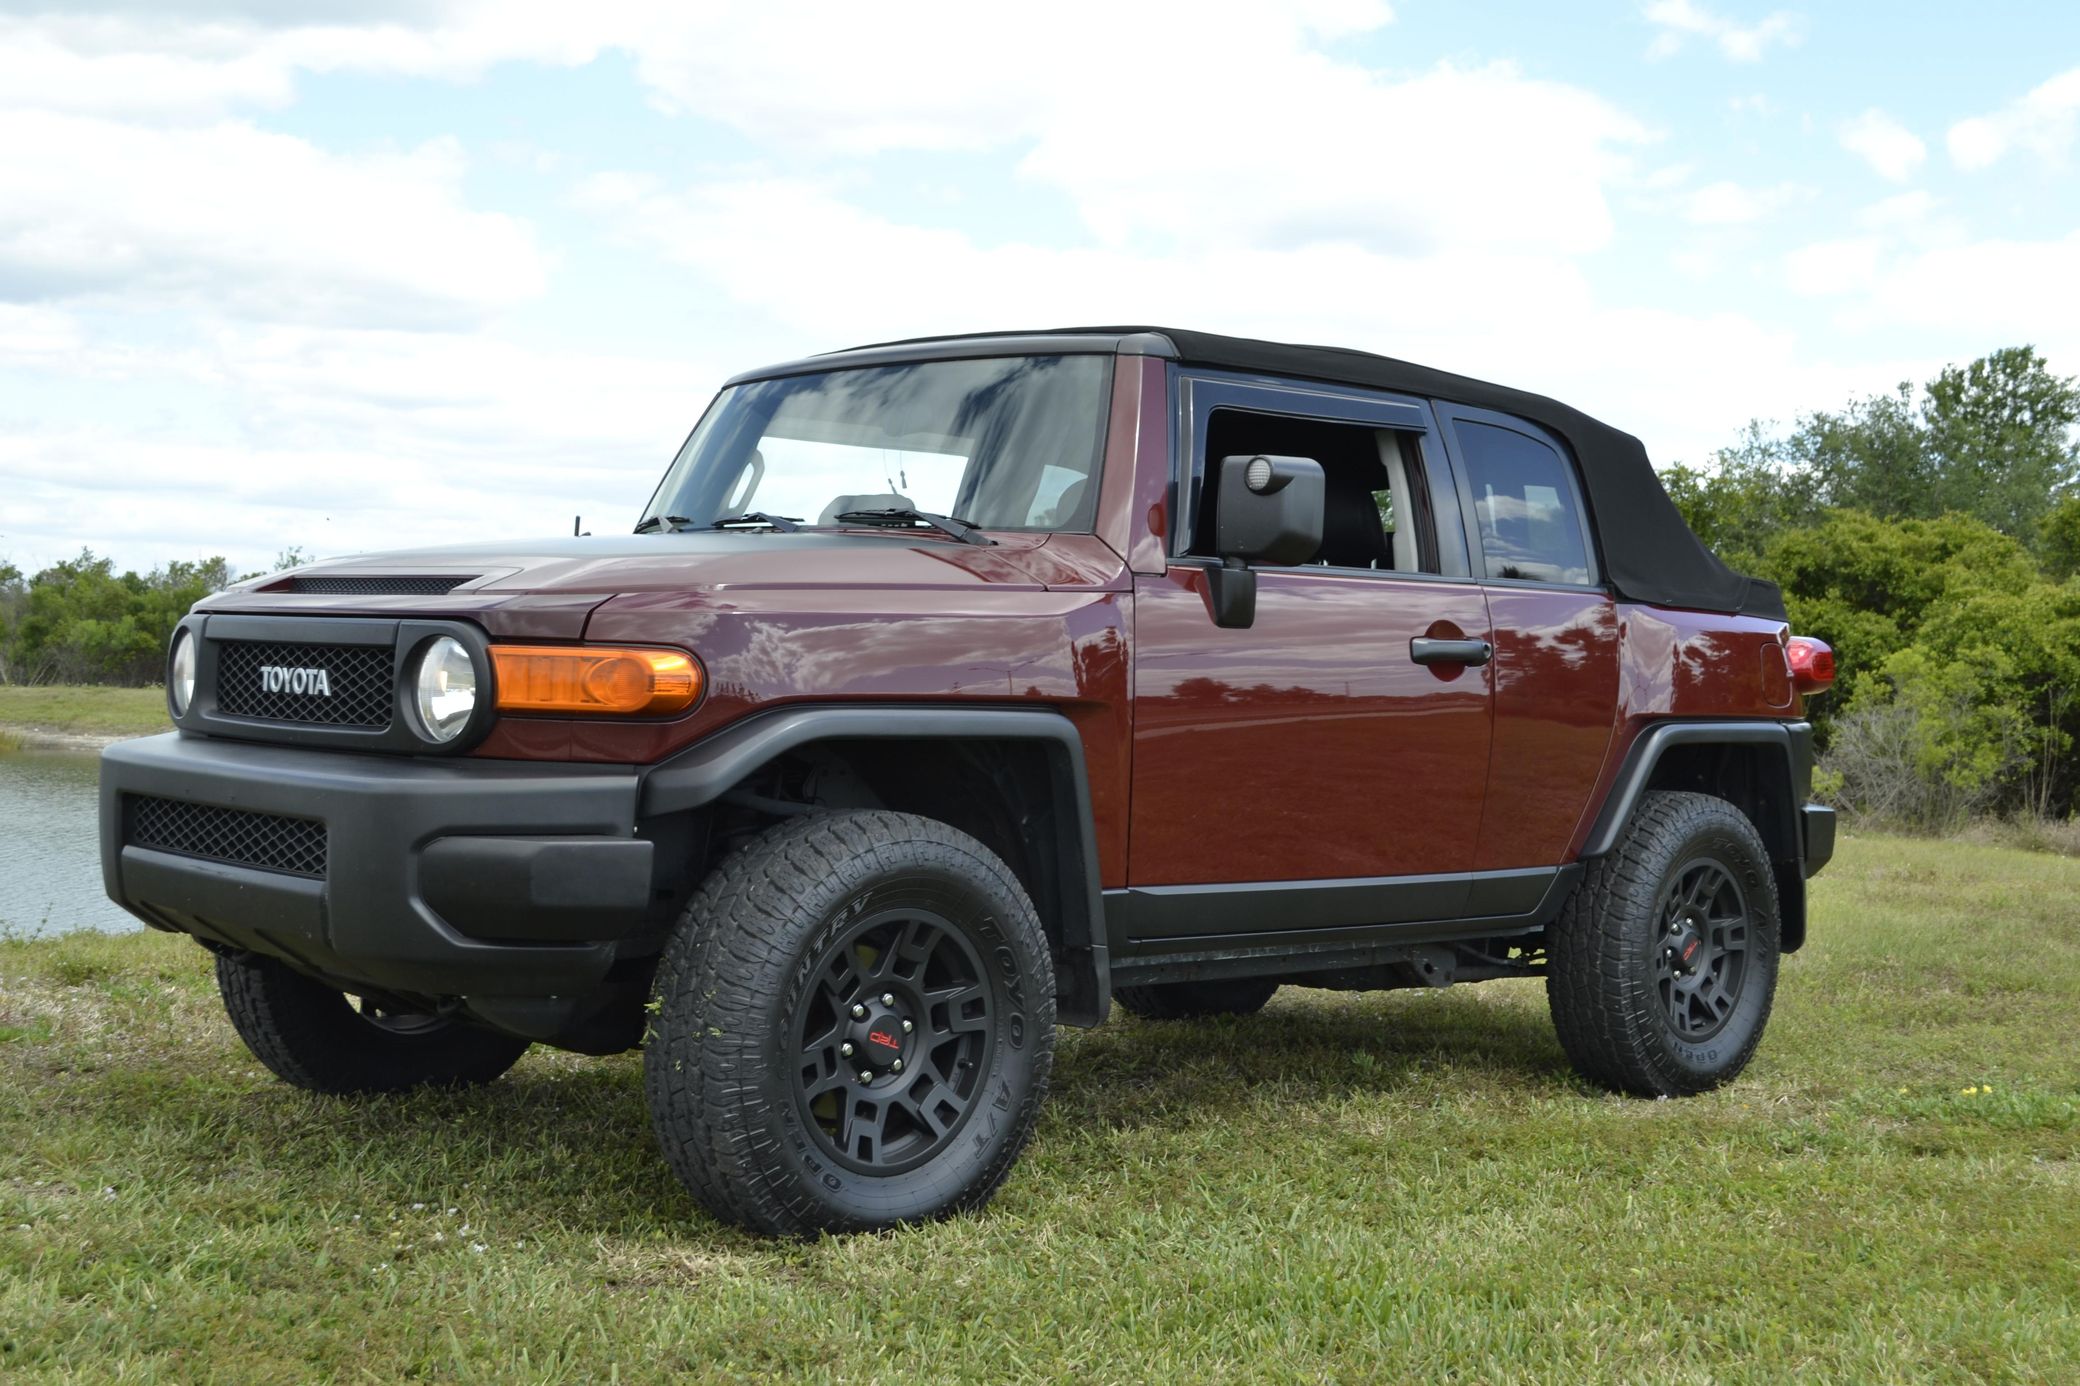 Get A Hold Of The Convertible FJ Cruiser Toyota Never Made | Carscoops